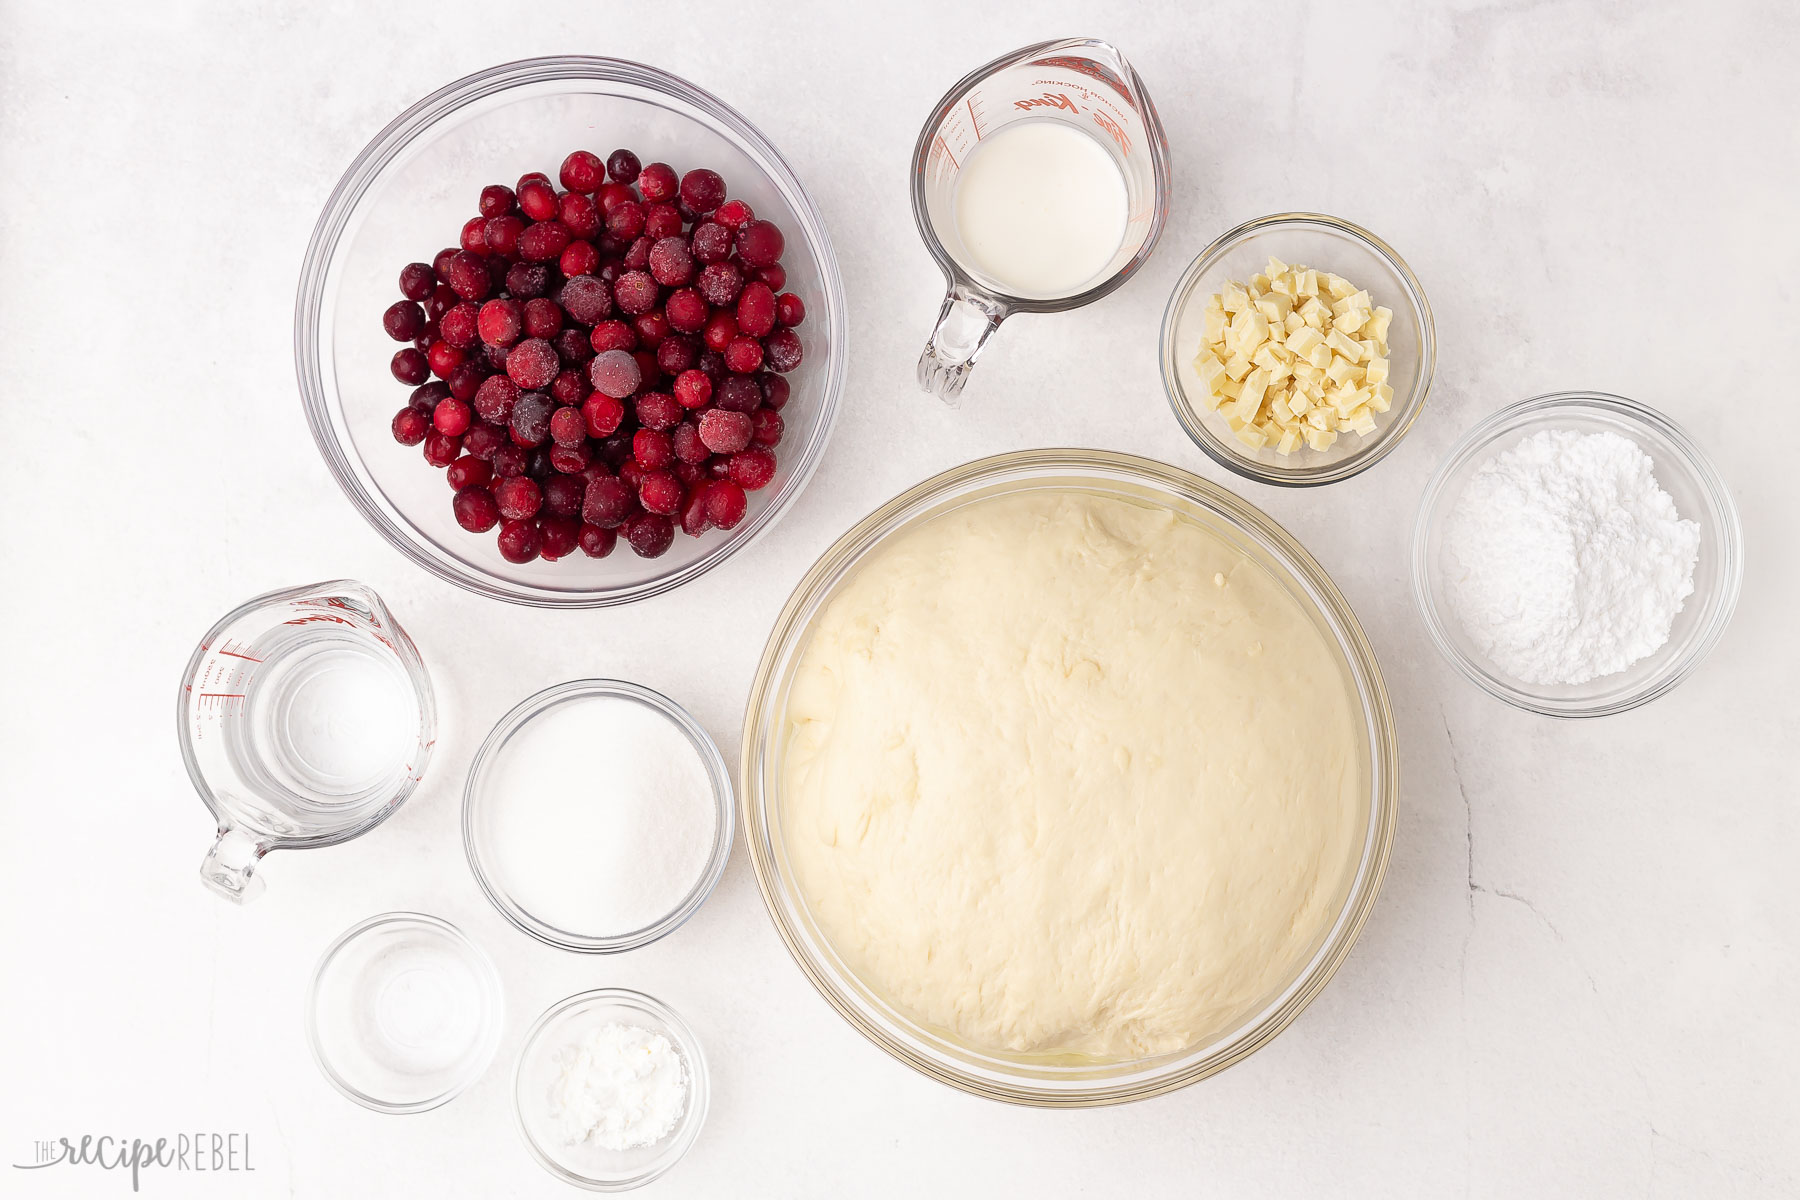 ingredients needed for cranberry sweet rolls on white background.